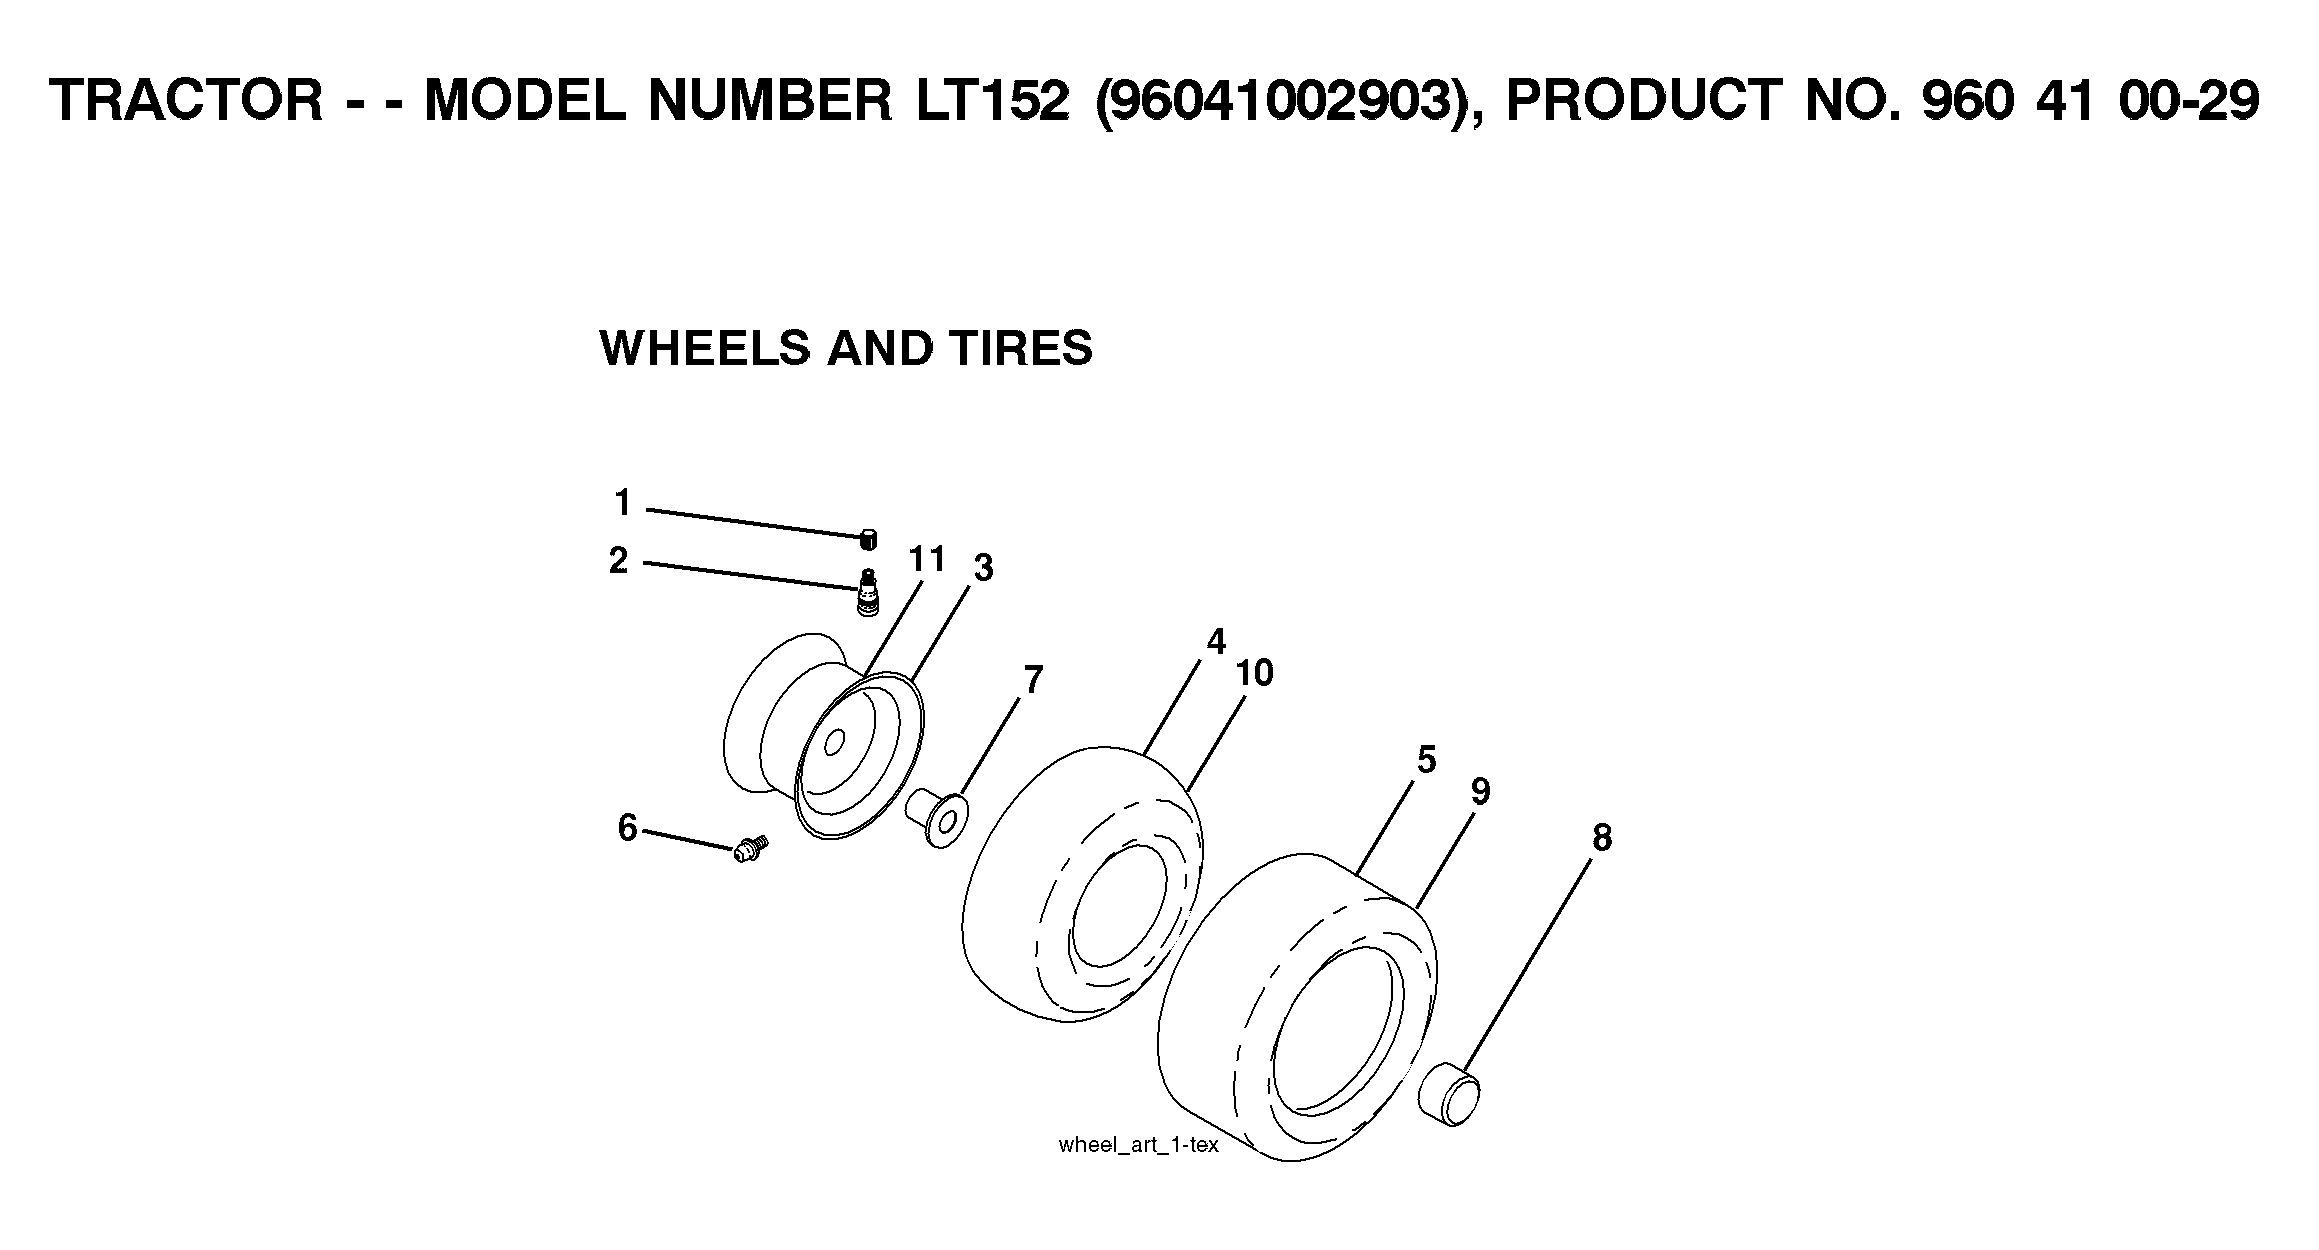 Wheels and tires 532059192, 532065139, 532122073, 532059904, 532106732, 532000278, 532009040, 532104757, 532420531, 532420531, 532007152, 532106108, 576707201